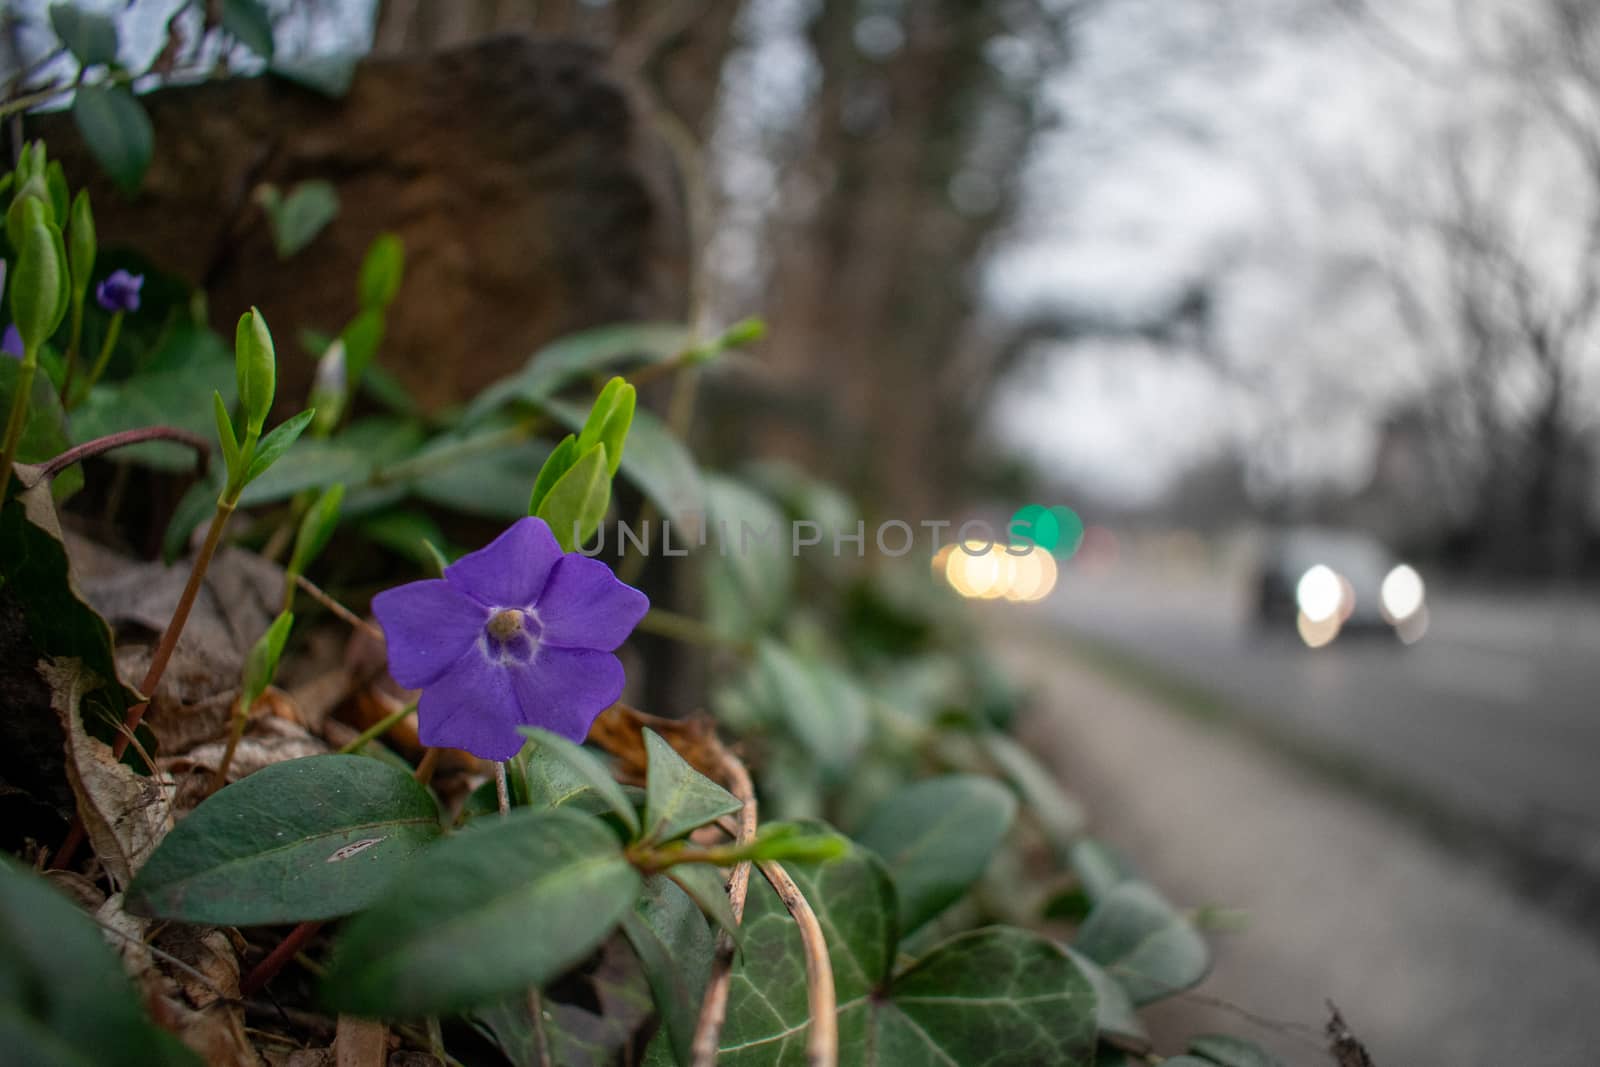 A Small Purple Flower on a Busy Suburban Street With Cars in the Background